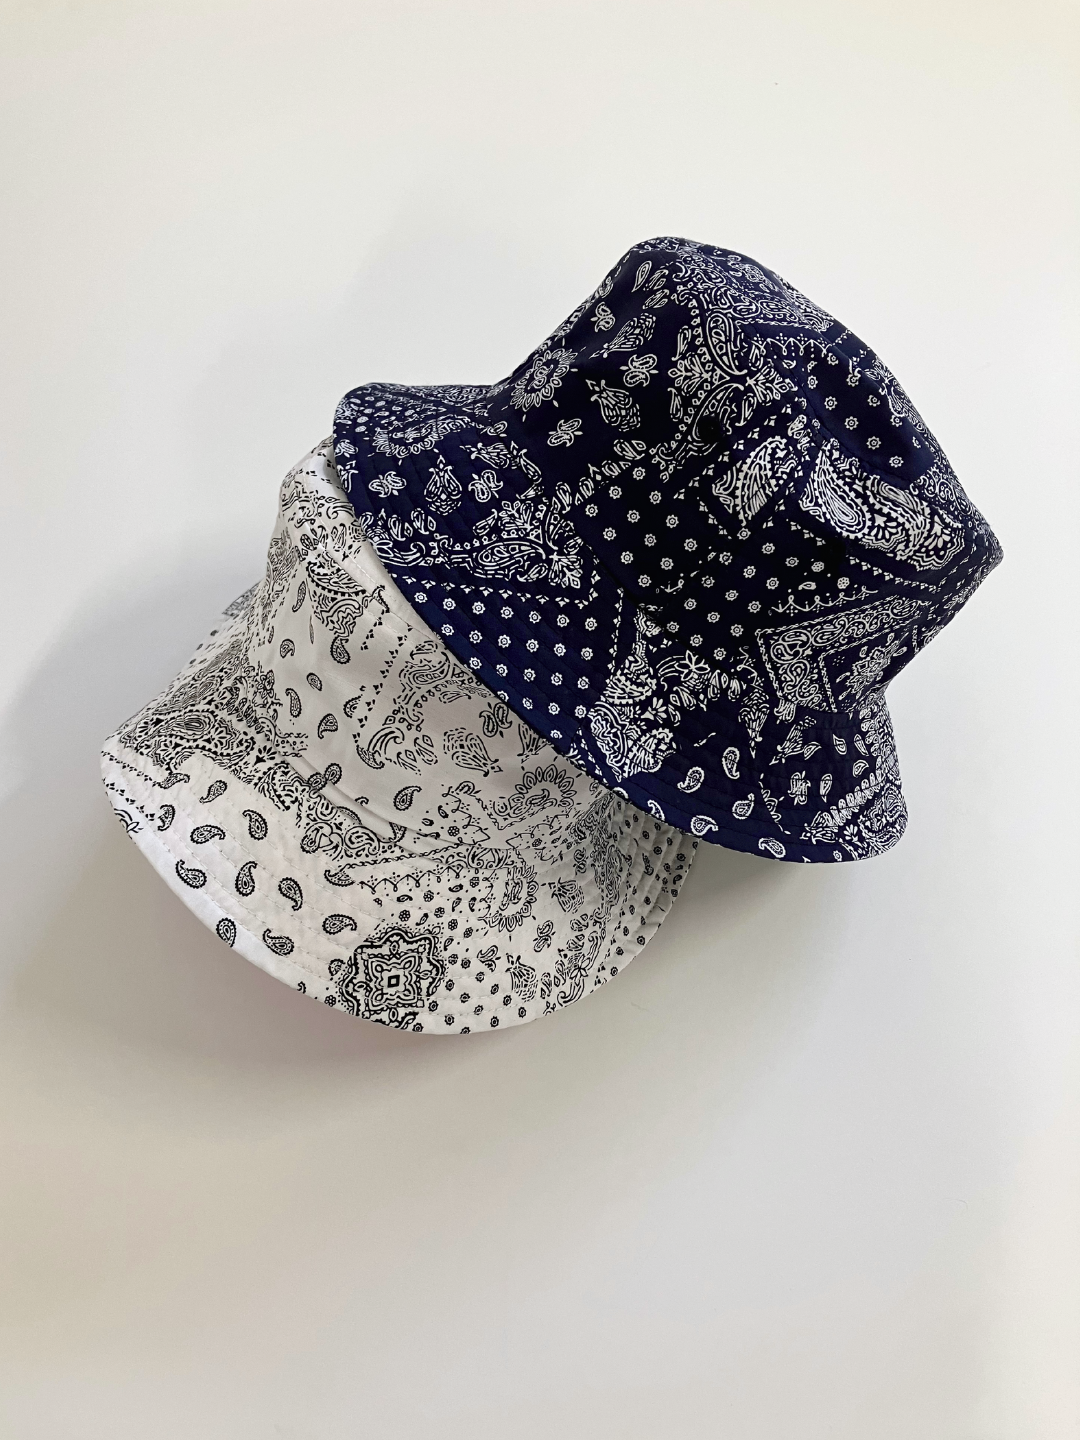 A navy and white bandana bucket hat, one on top of the other on a white surface